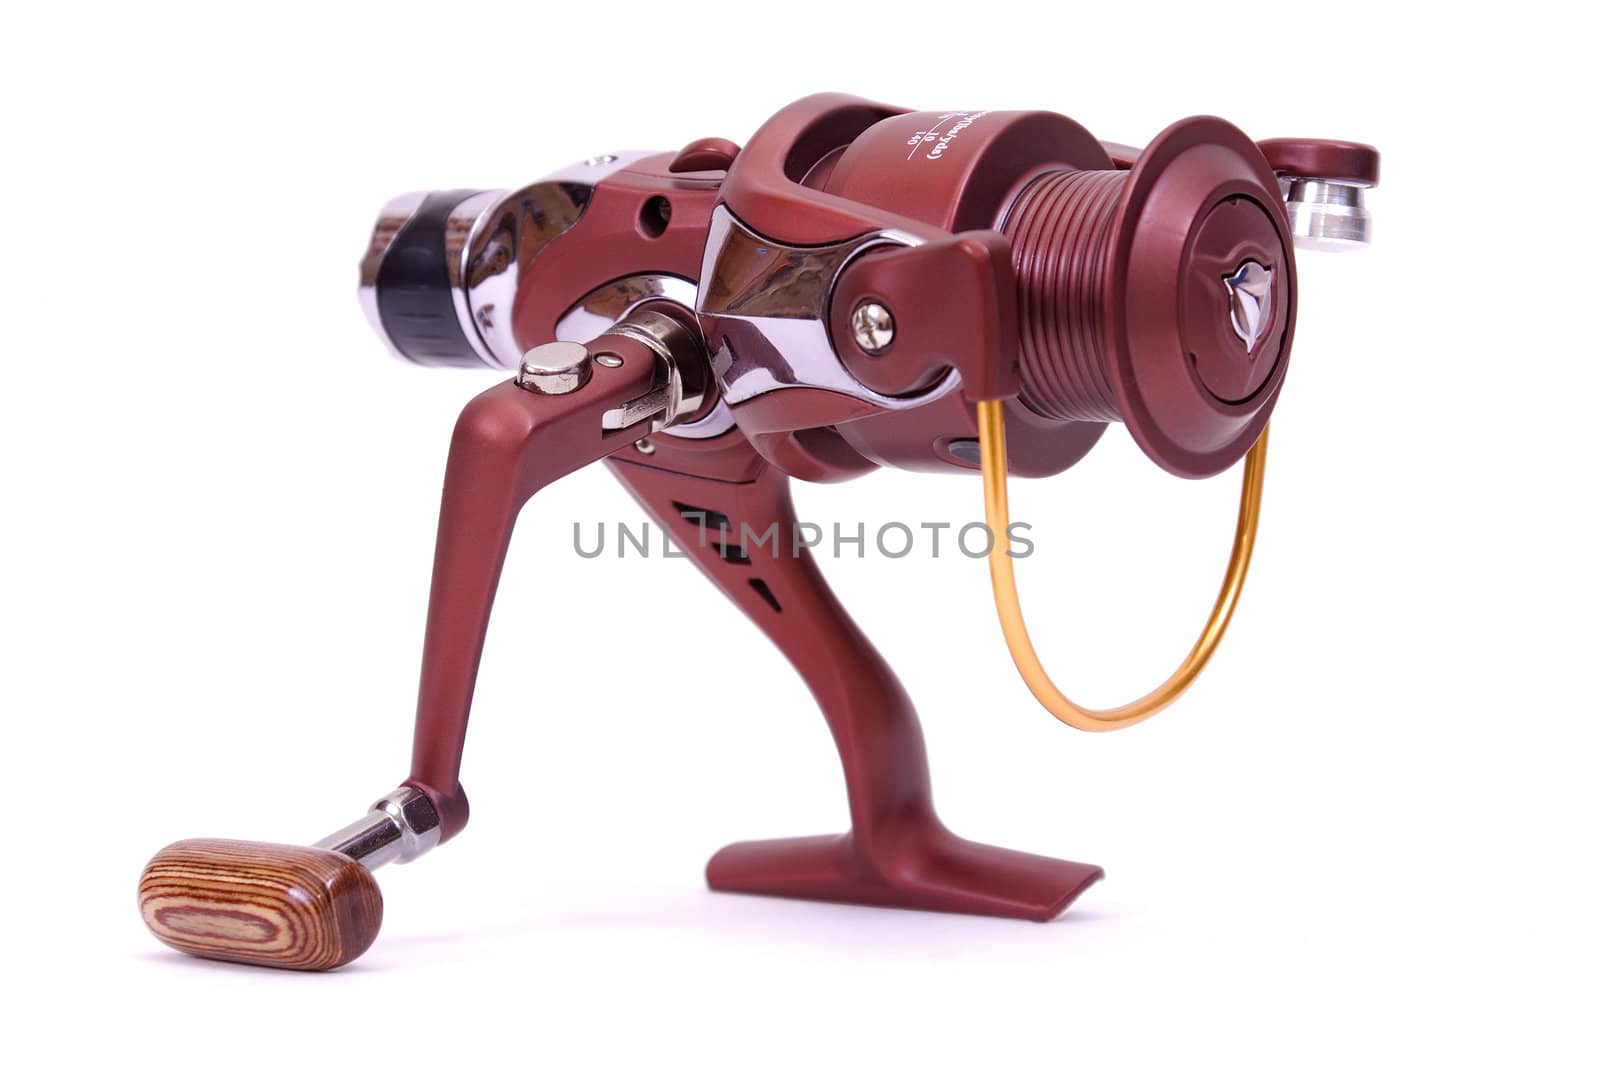 inertia-free spinning reel isolated on a white background